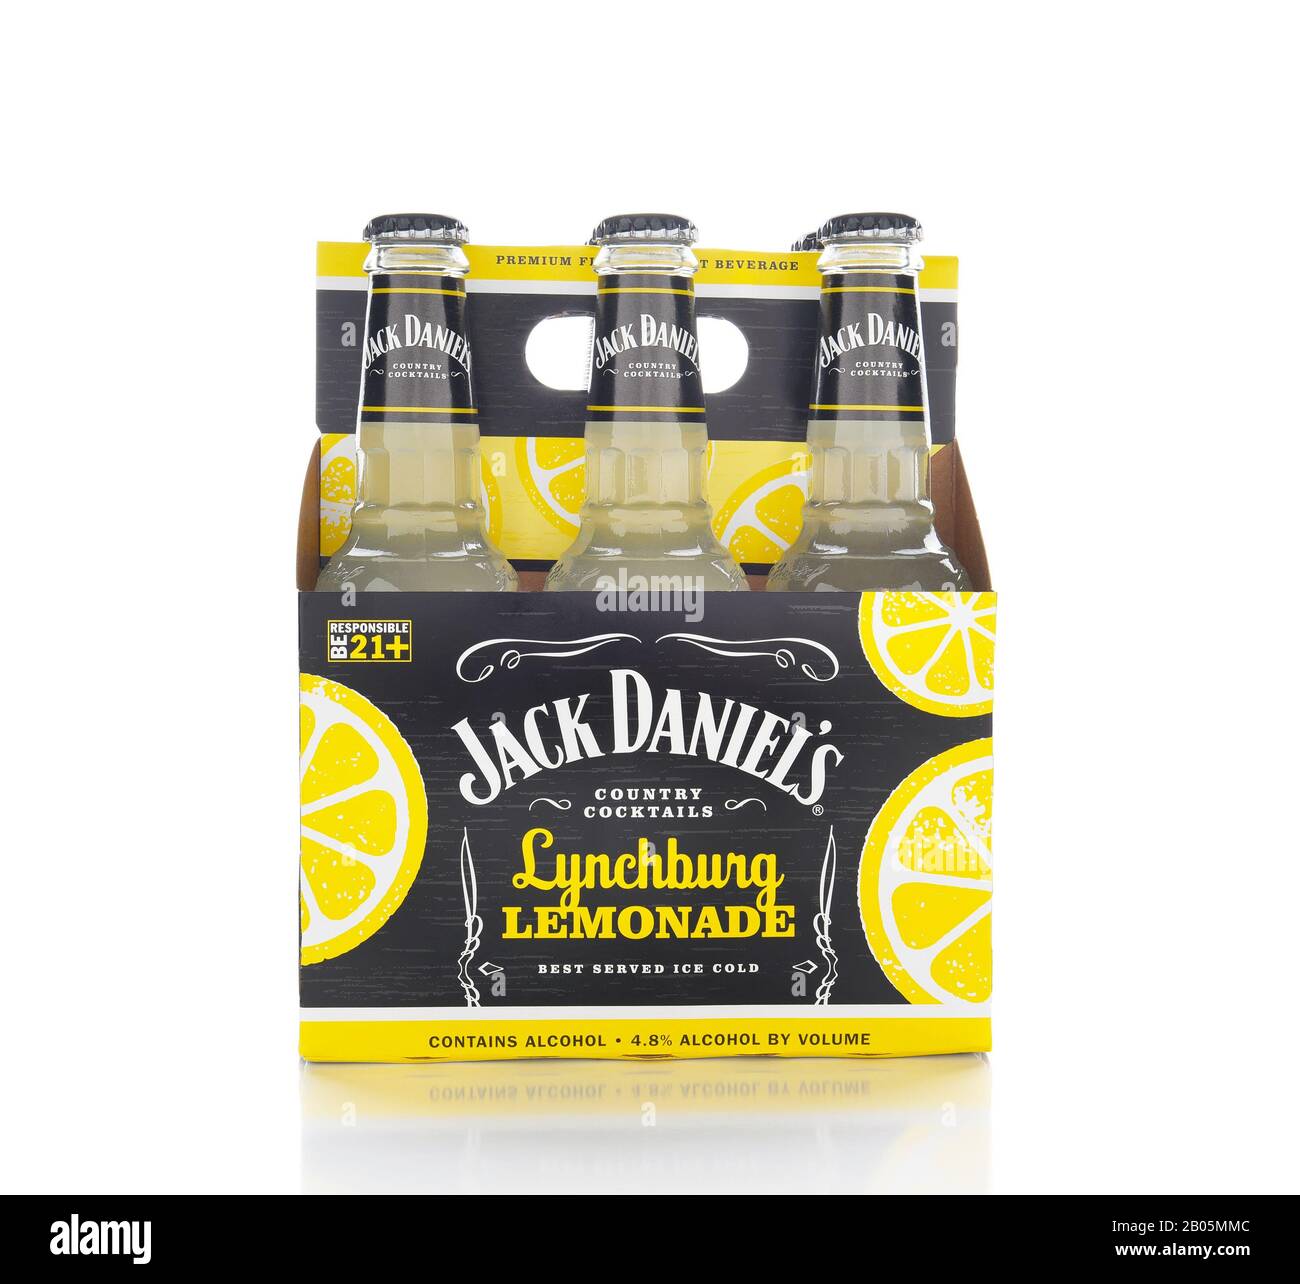 IRVINE, CALIFORNIA - NOVEMBER 16, 2016: A 6 pack of Jack Daniels Lynchburg  Lemonade. A cocktail made with Triple Sec, whiskey, Sour Mix and Lemon Lime  Stock Photo - Alamy